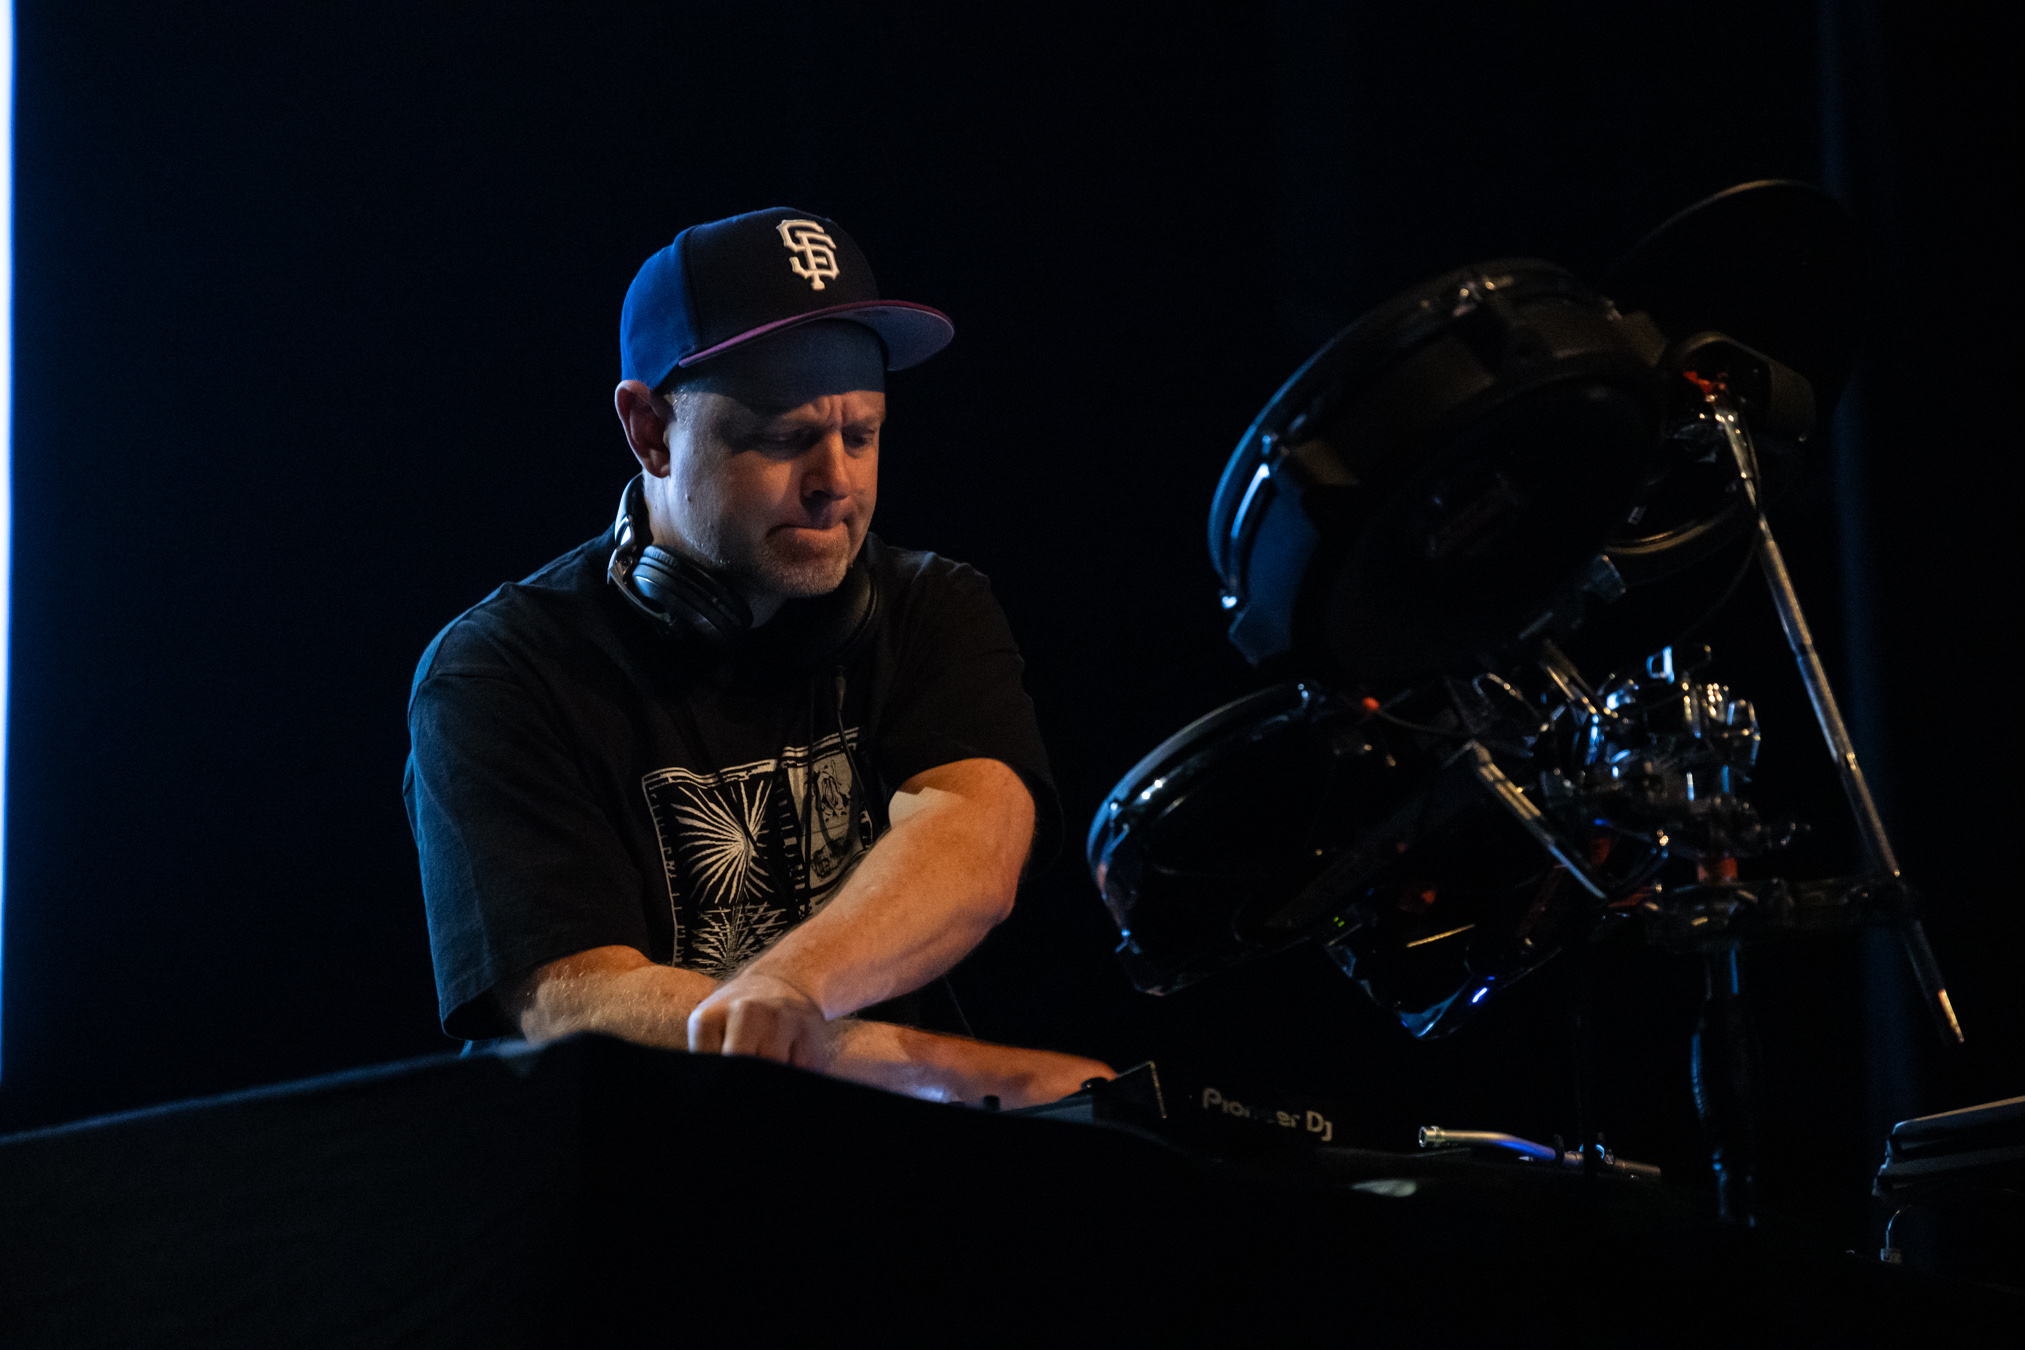 DJ Shadow is twisting knobs on the stage of the Vogue Theatre backlit by the massive projection screen.